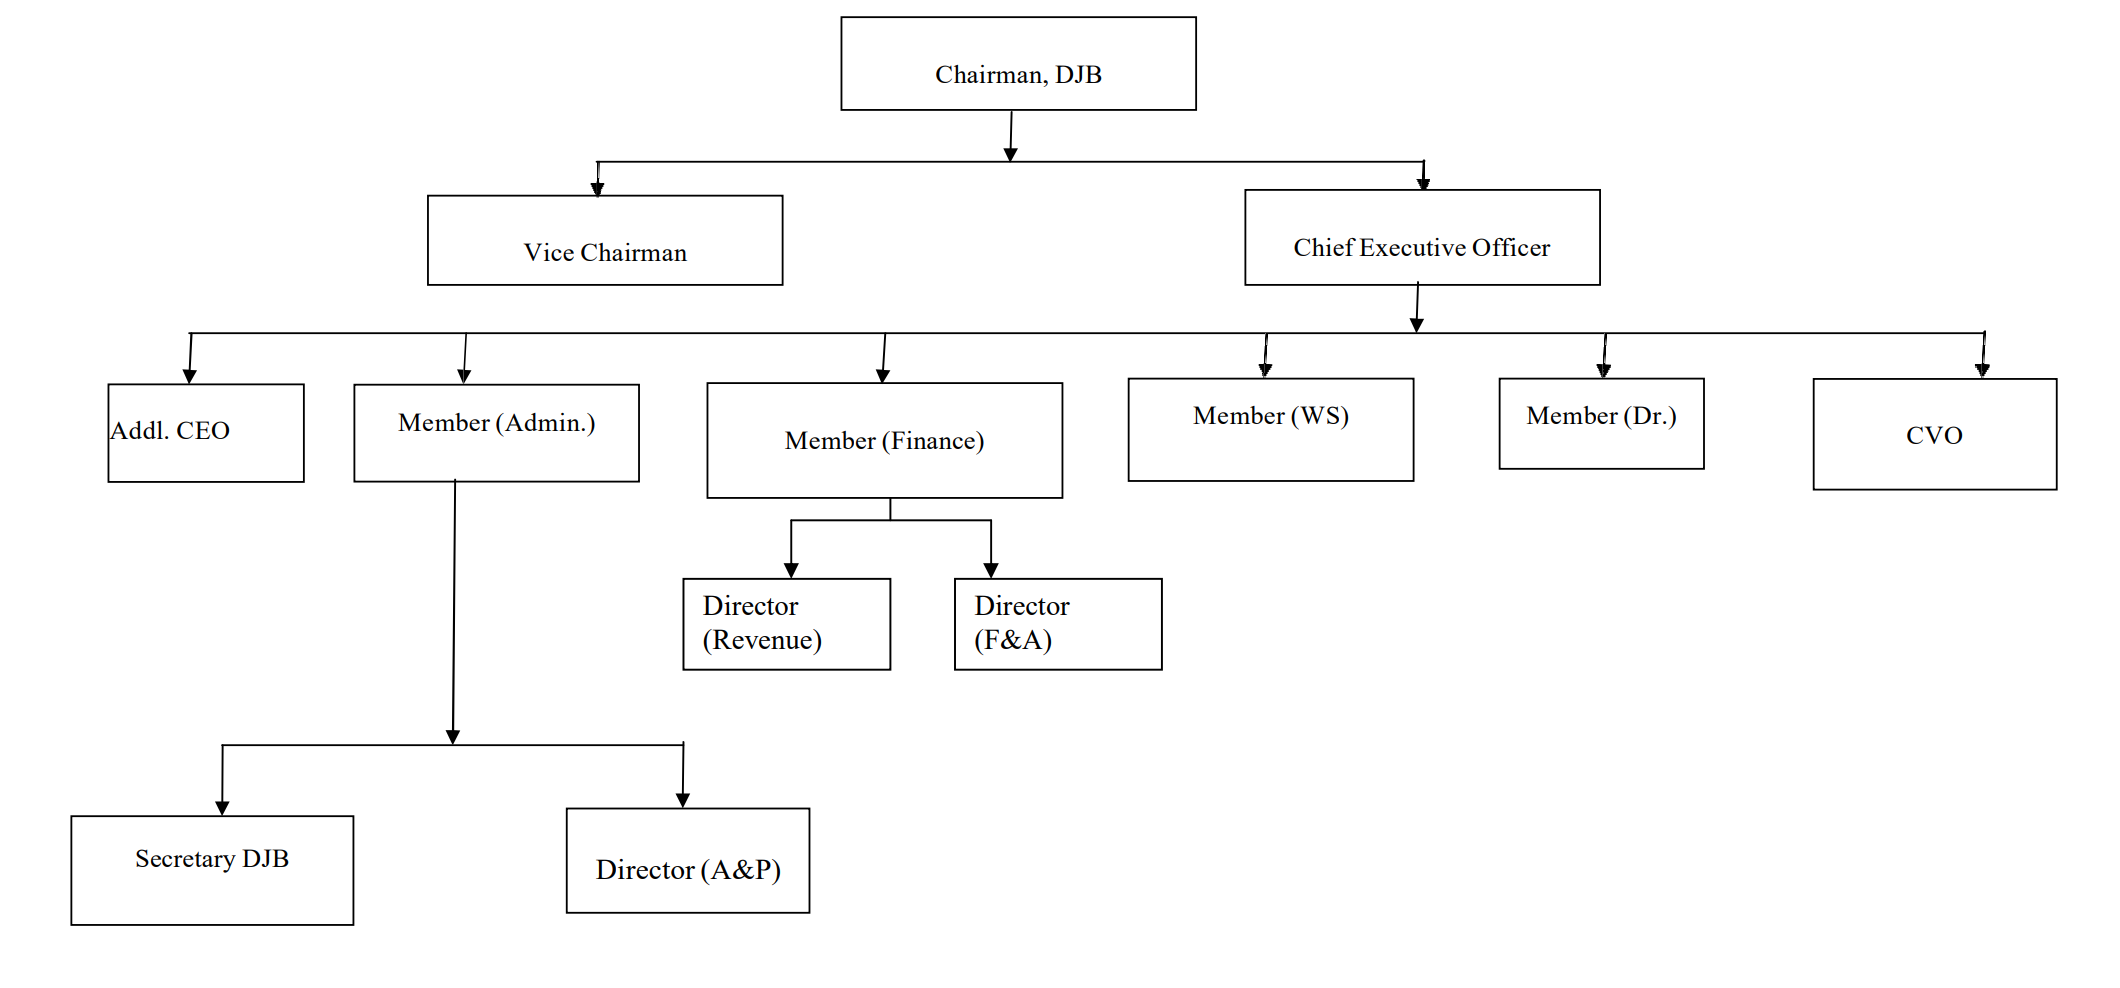 Administrative structure of the Delhi Jal Board